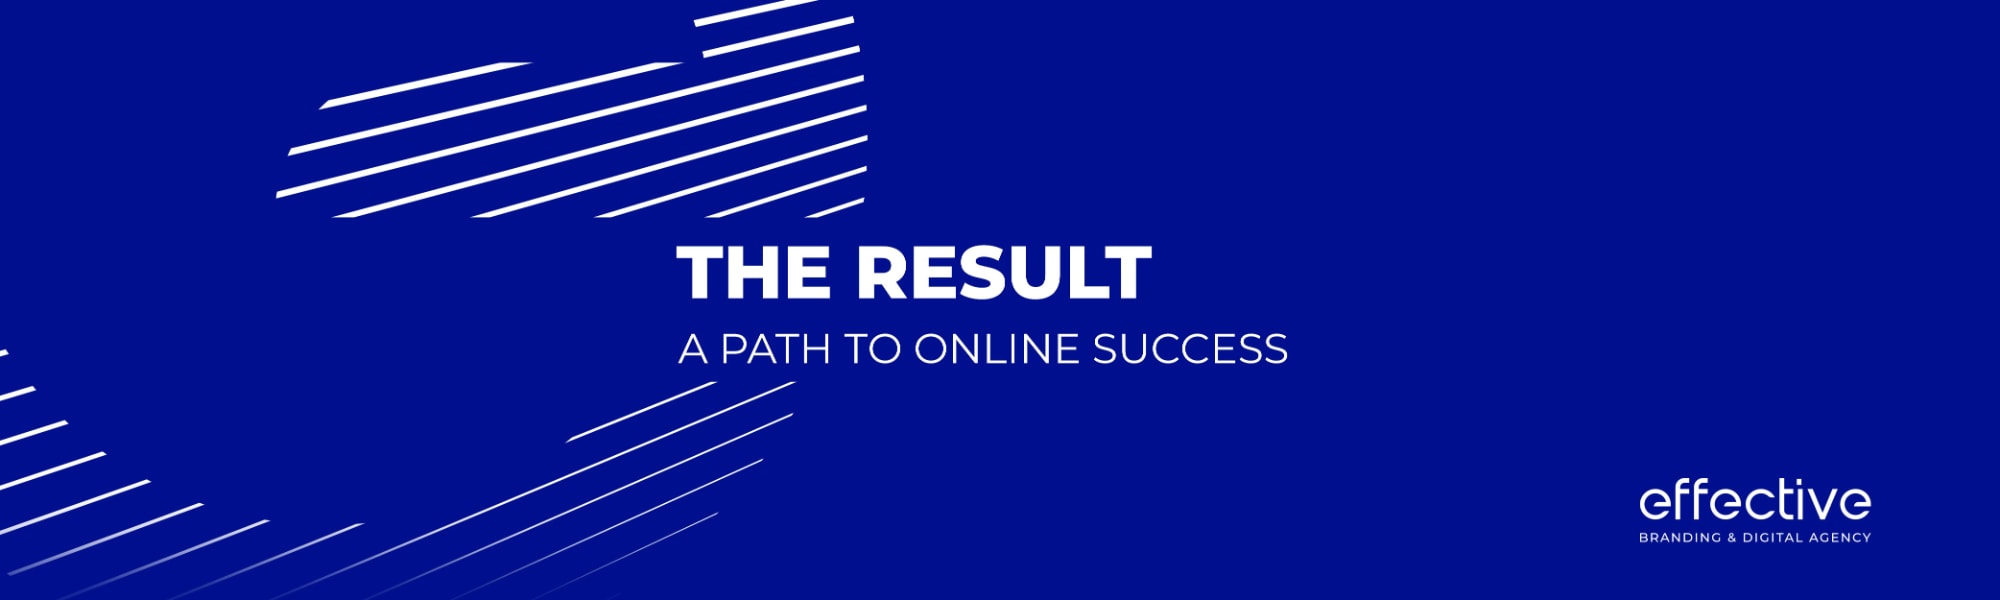 The Result A Path to Online Success